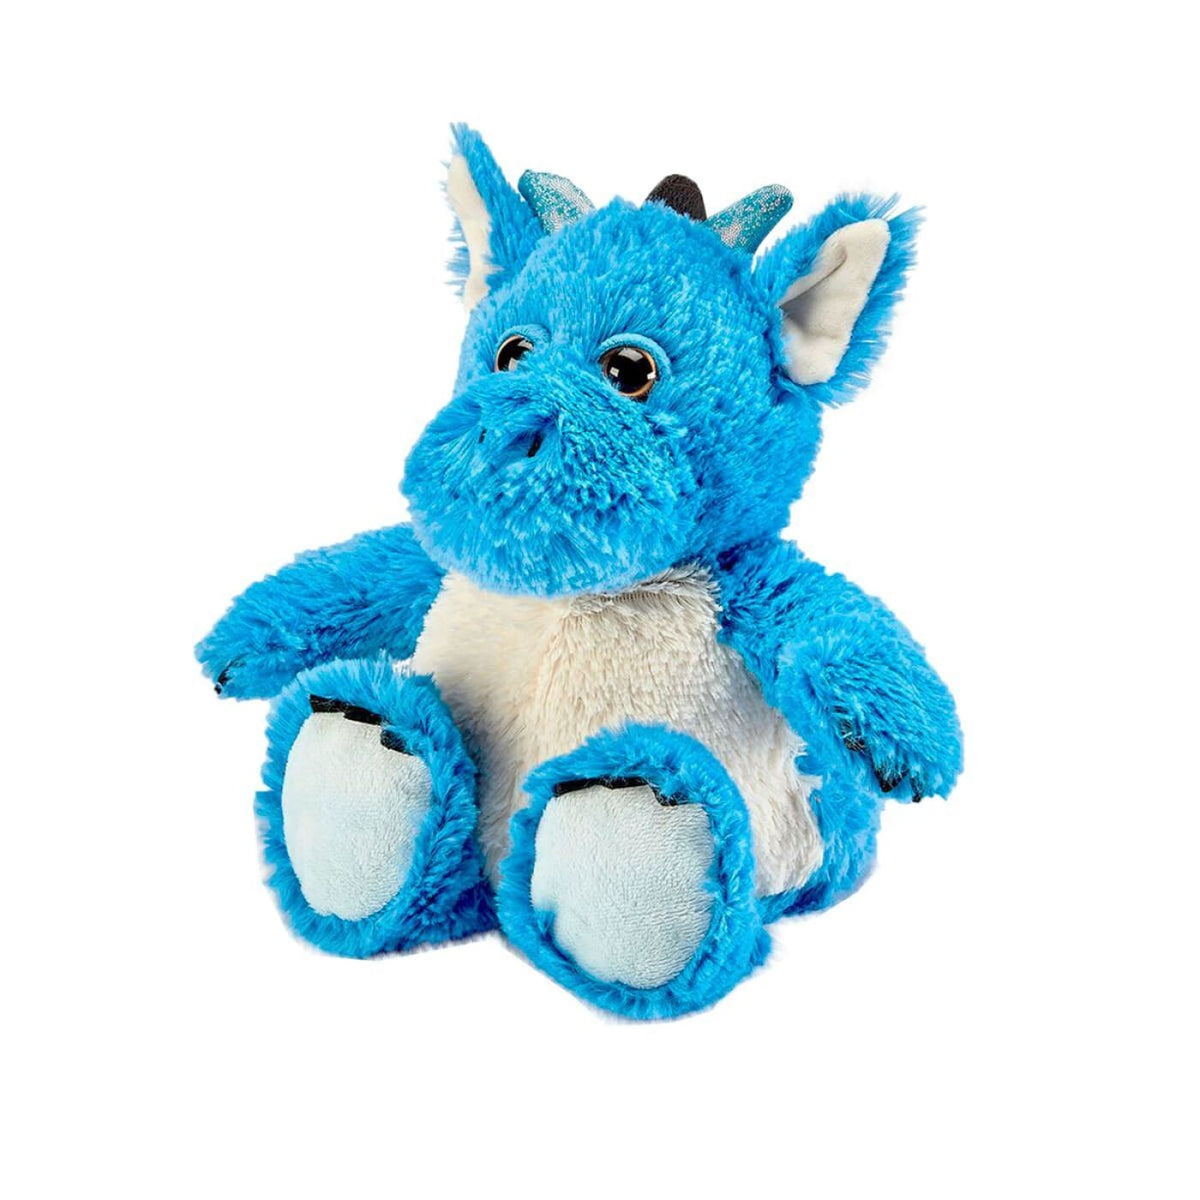 Warmies Cozy Plush - Blue Dragon - Dragon - HEALTH &amp; HOME SAFETY - THERMOMETERS/MEDICINAL